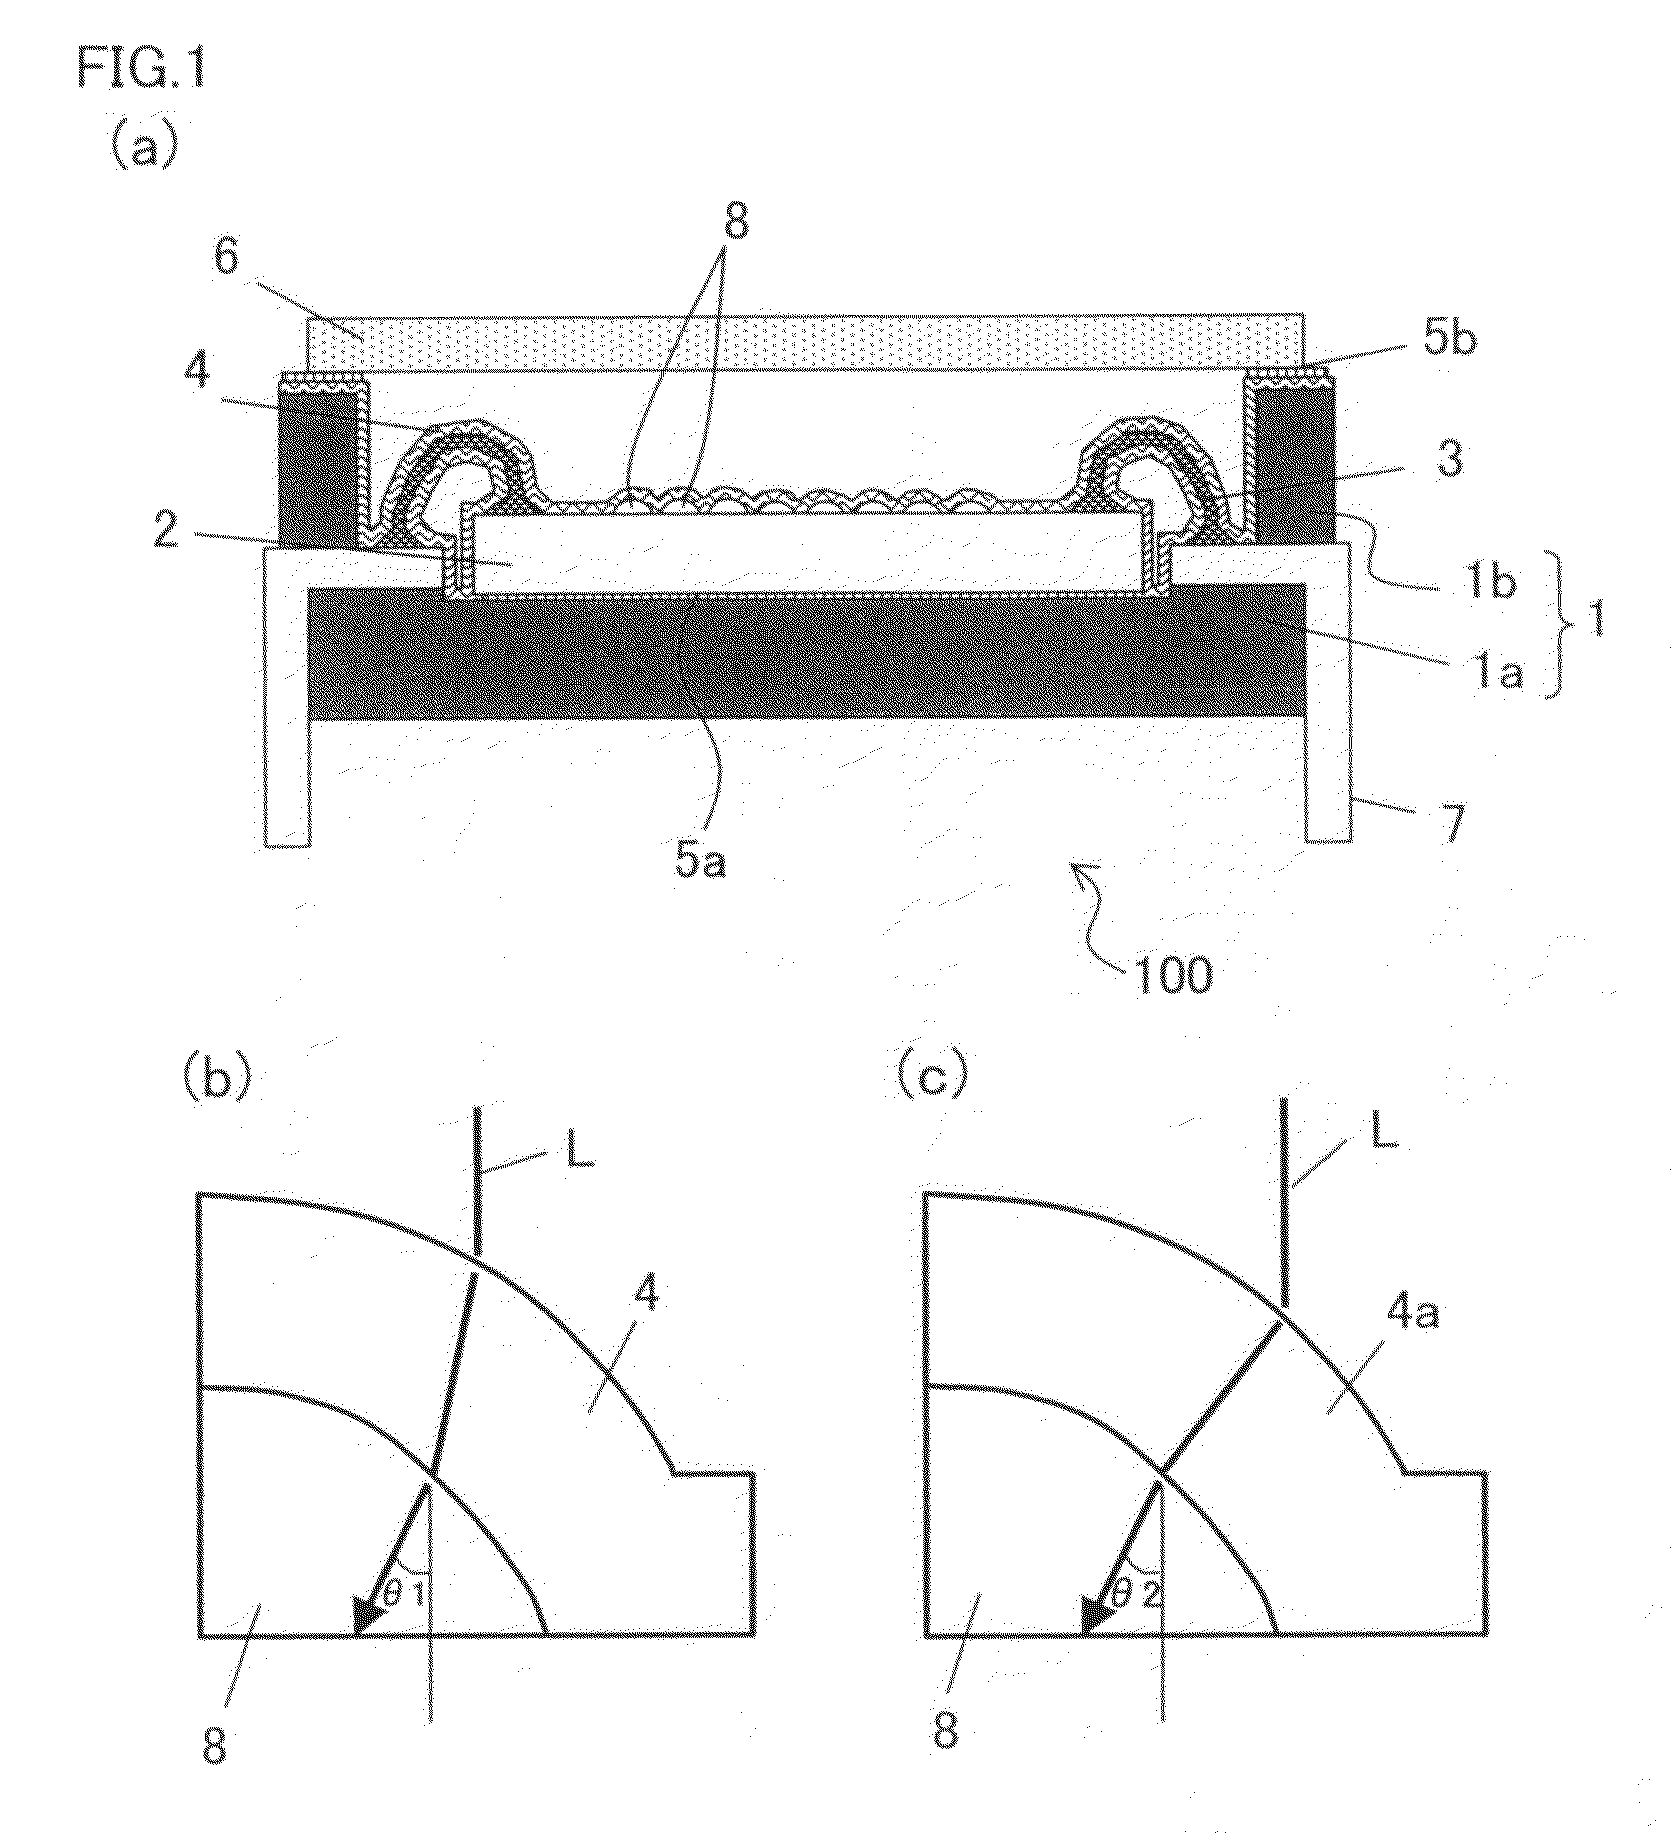 Solid-state image capturing apparatus, mounting method of solid-state image capturing apparatus, manufacturing method of solid-state image capturing apparatus, and electronic information device